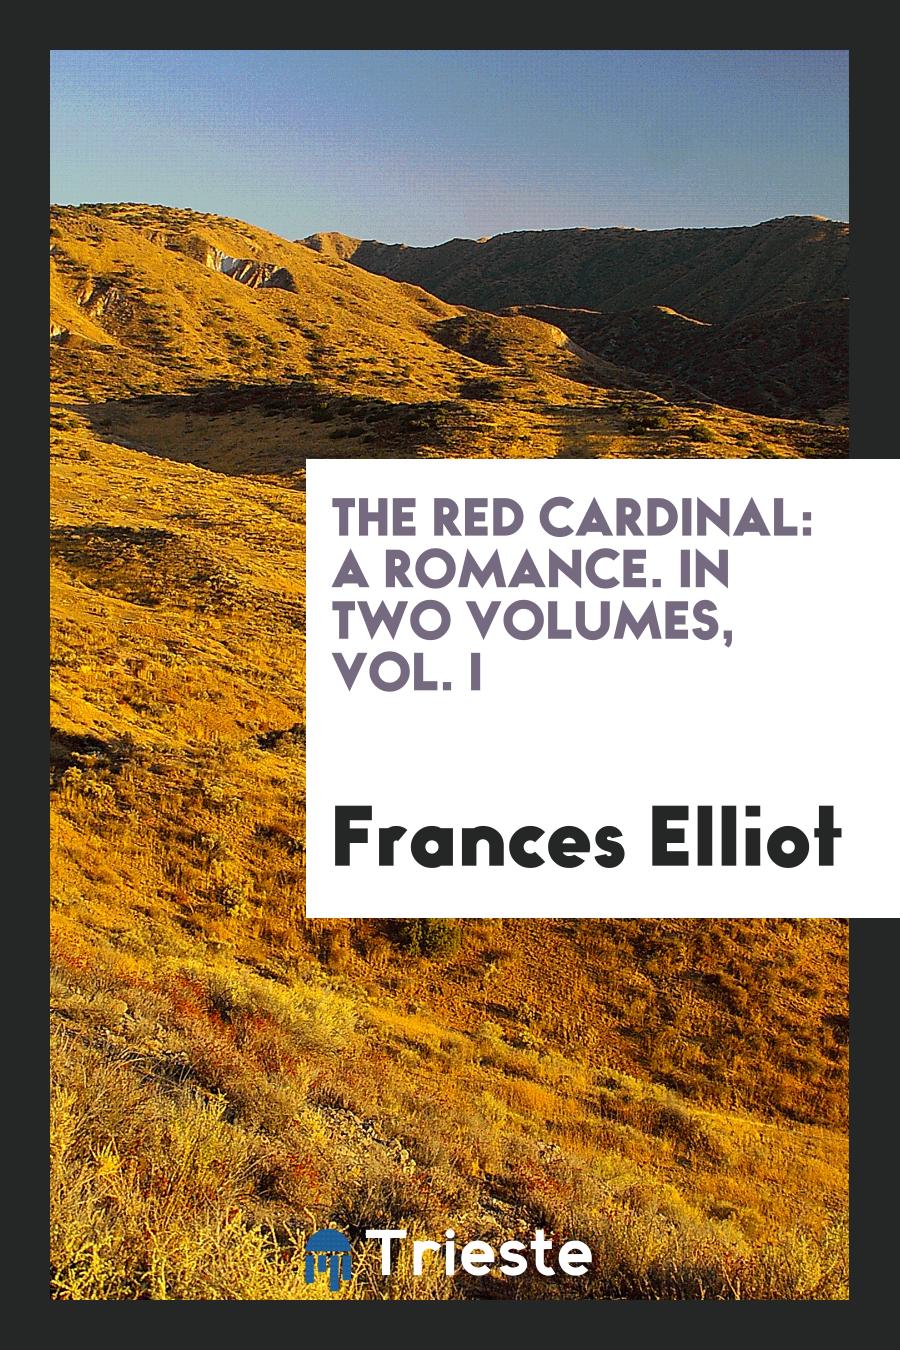 The Red Cardinal: A Romance. In Two Volumes, Vol. I